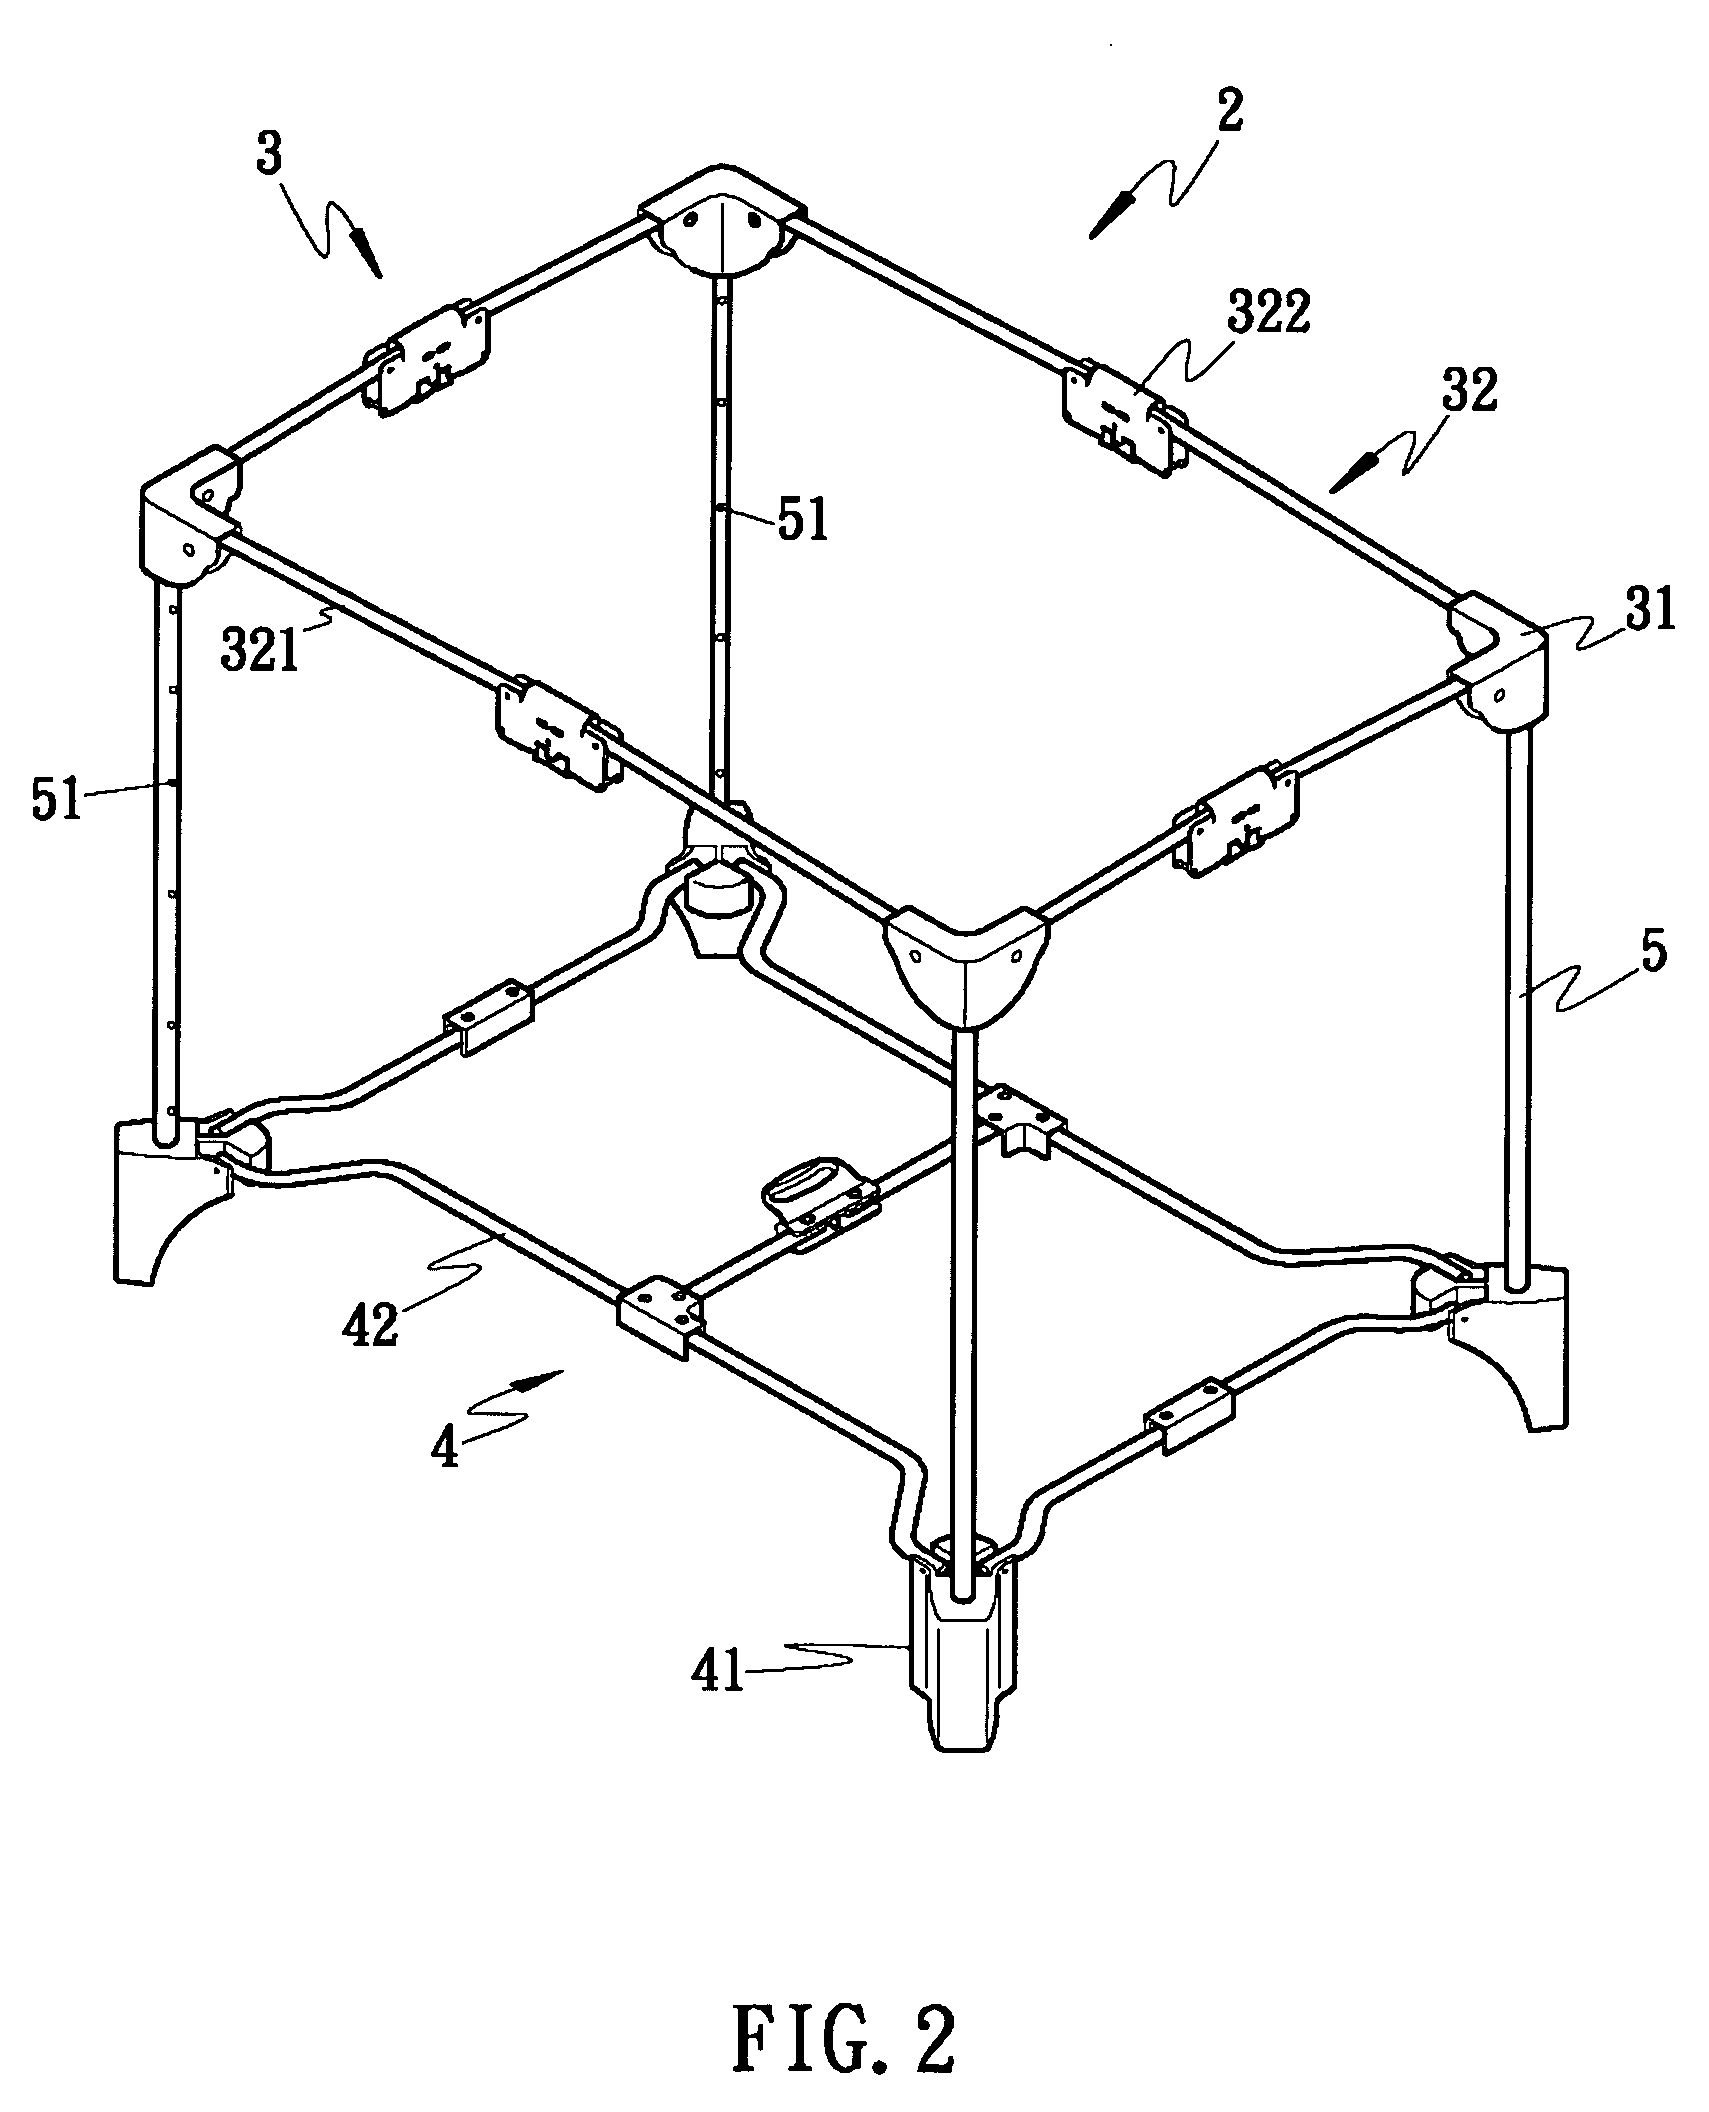 Fabric connecting structure for playyard